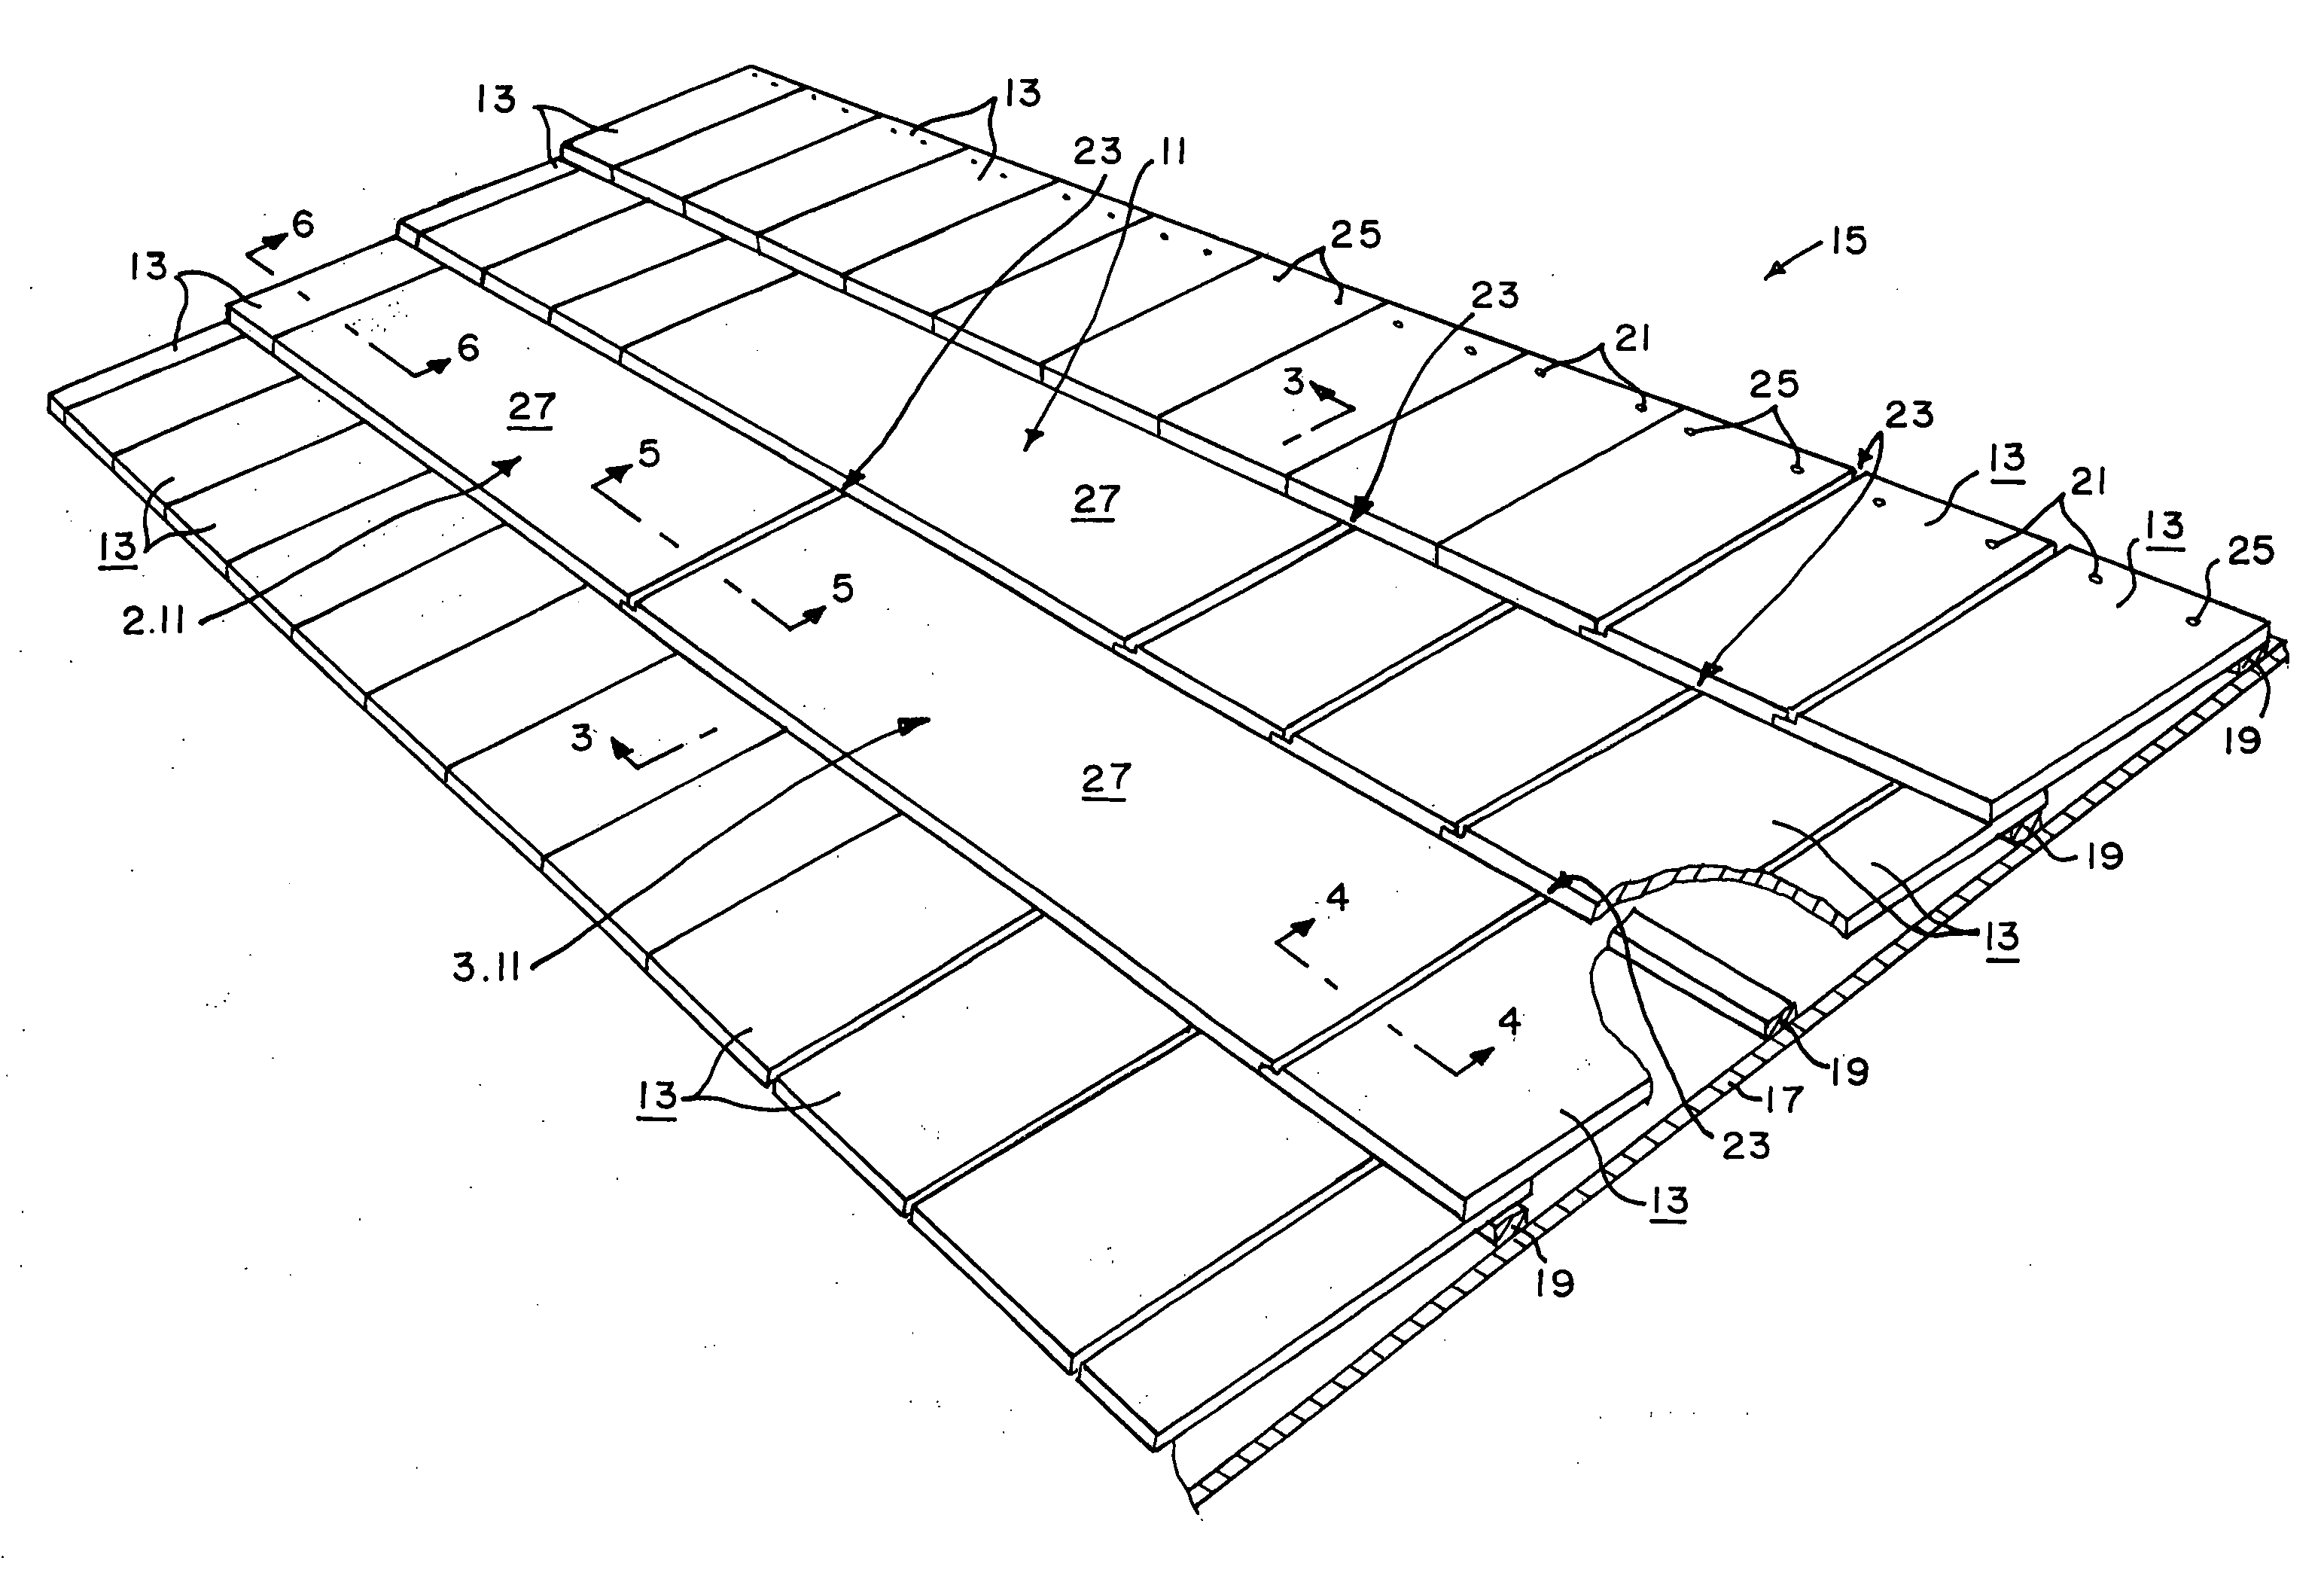 Rooftop photovoltaic module